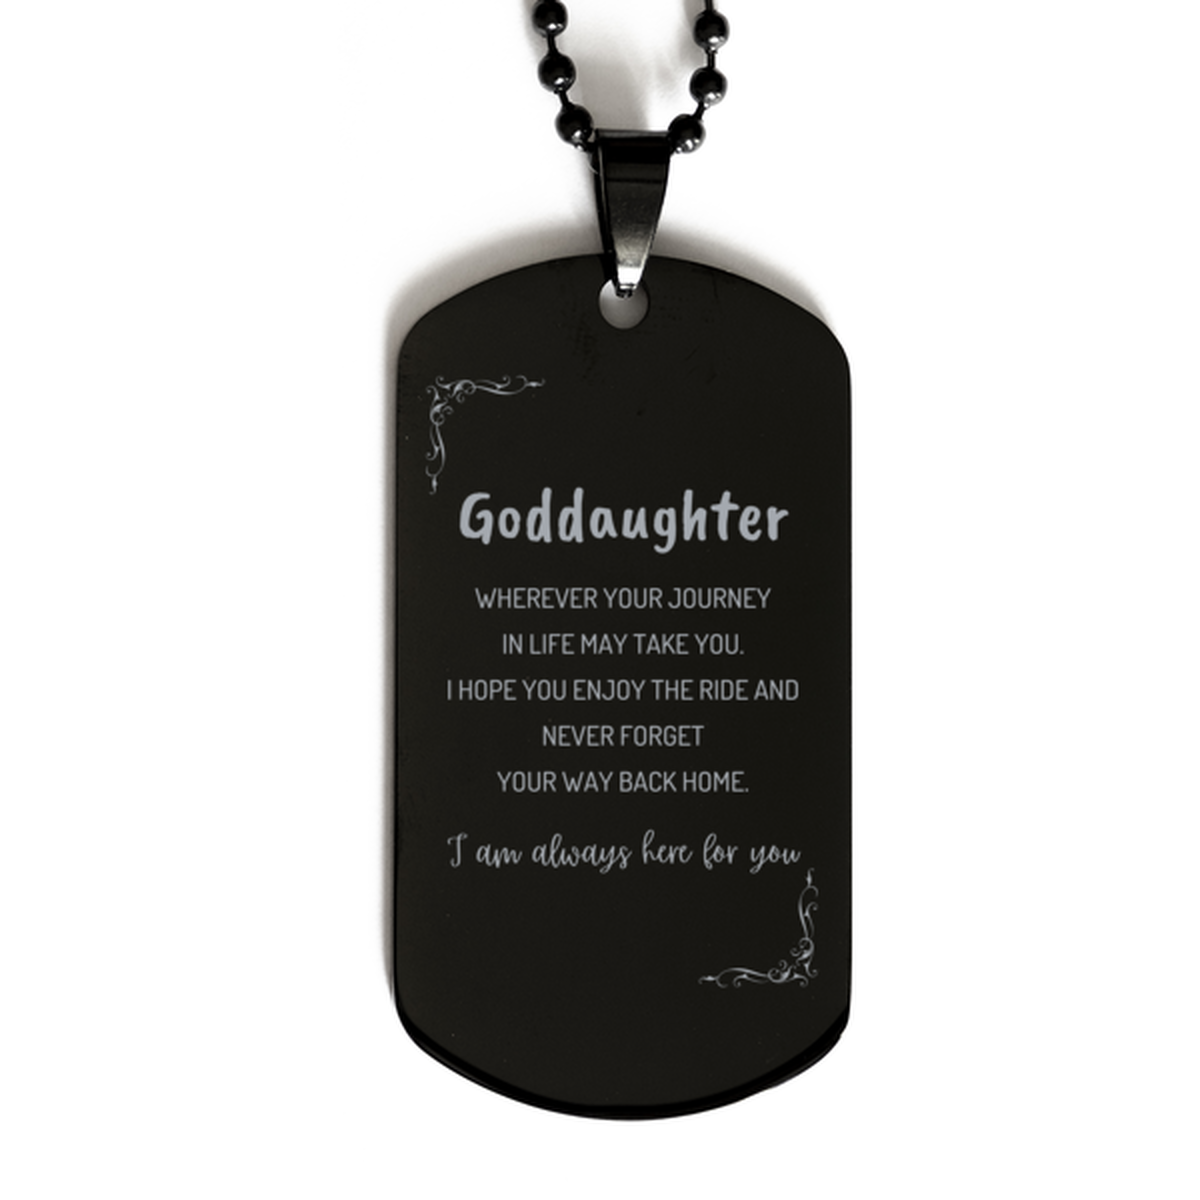 Goddaughter wherever your journey in life may take you, I am always here for you Goddaughter Black Dog Tag, Awesome Christmas Gifts For Goddaughter, Goddaughter Birthday Gifts for Men Women Family Loved One